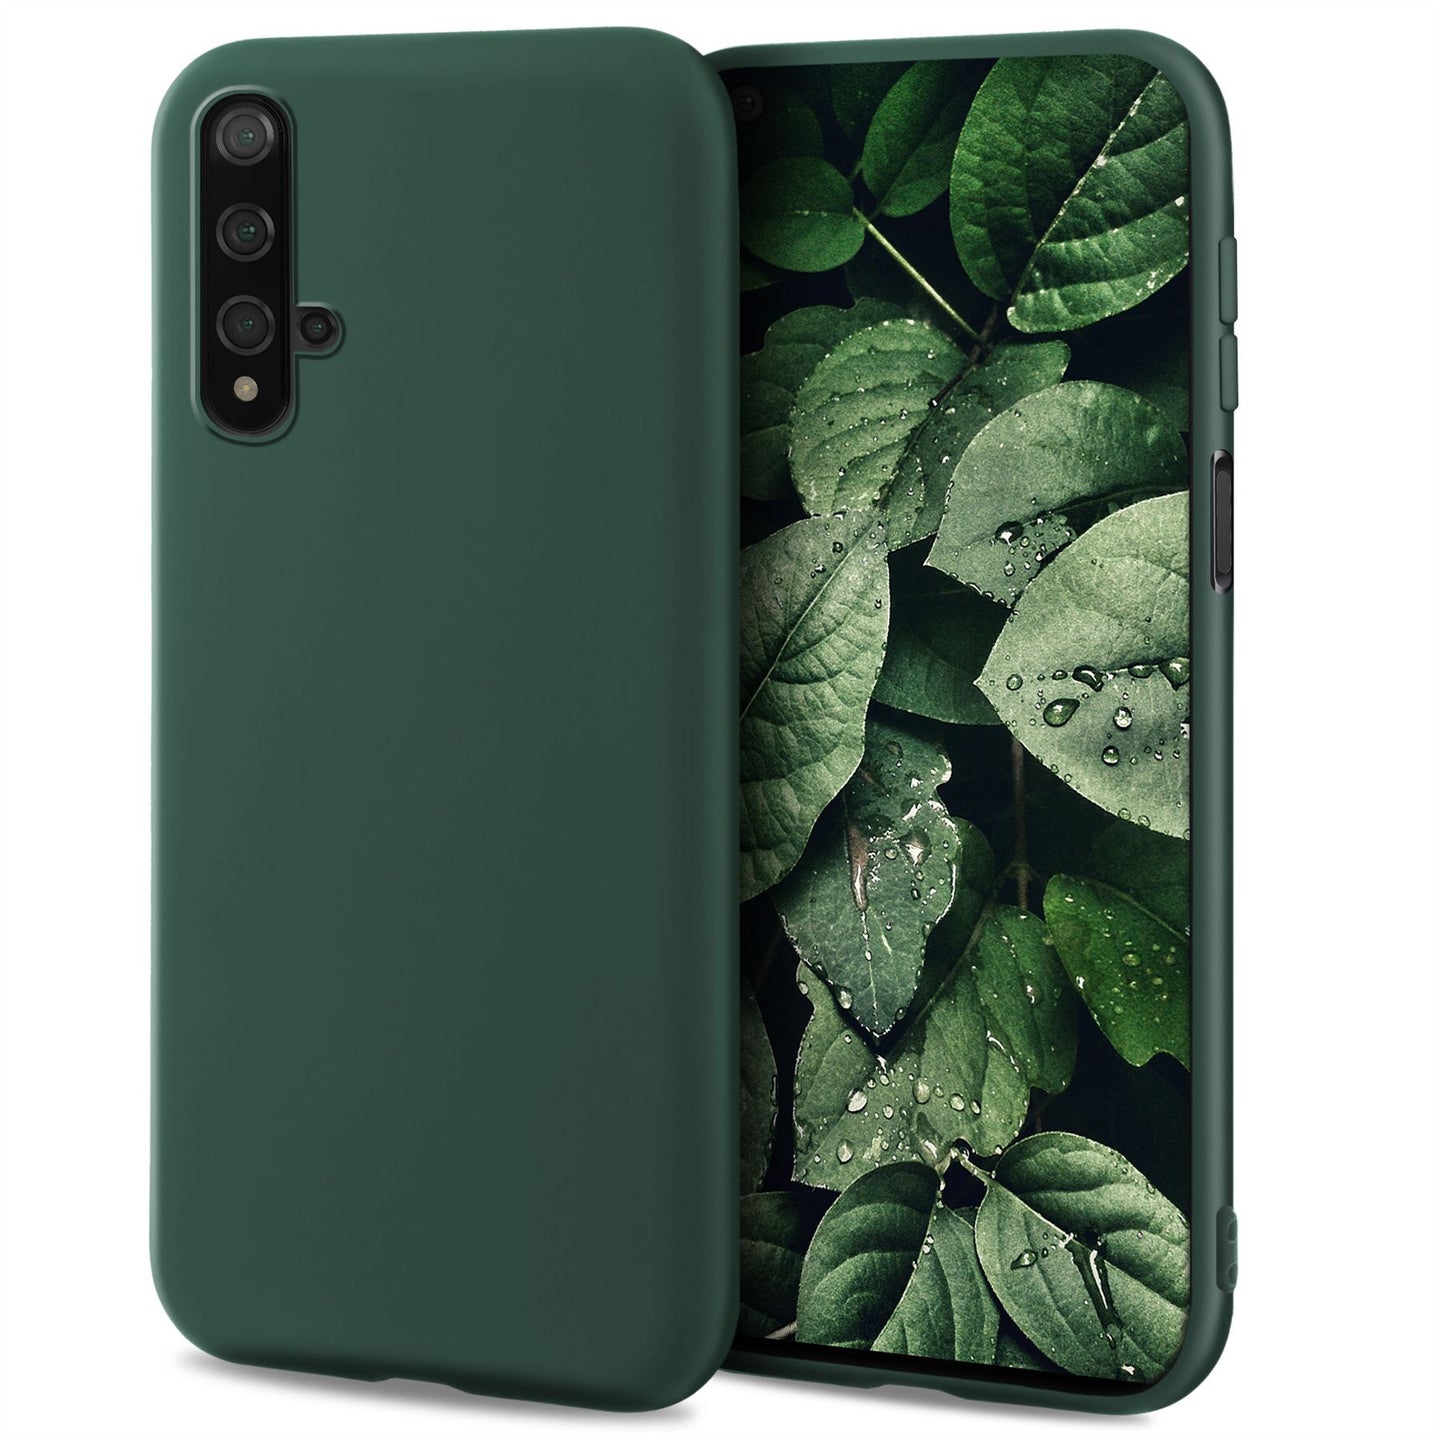 Moozy Minimalist Series Silicone Case for Huawei Nova 5T and Honor 20, Midnight Green - Matte Finish Slim Soft TPU Cover